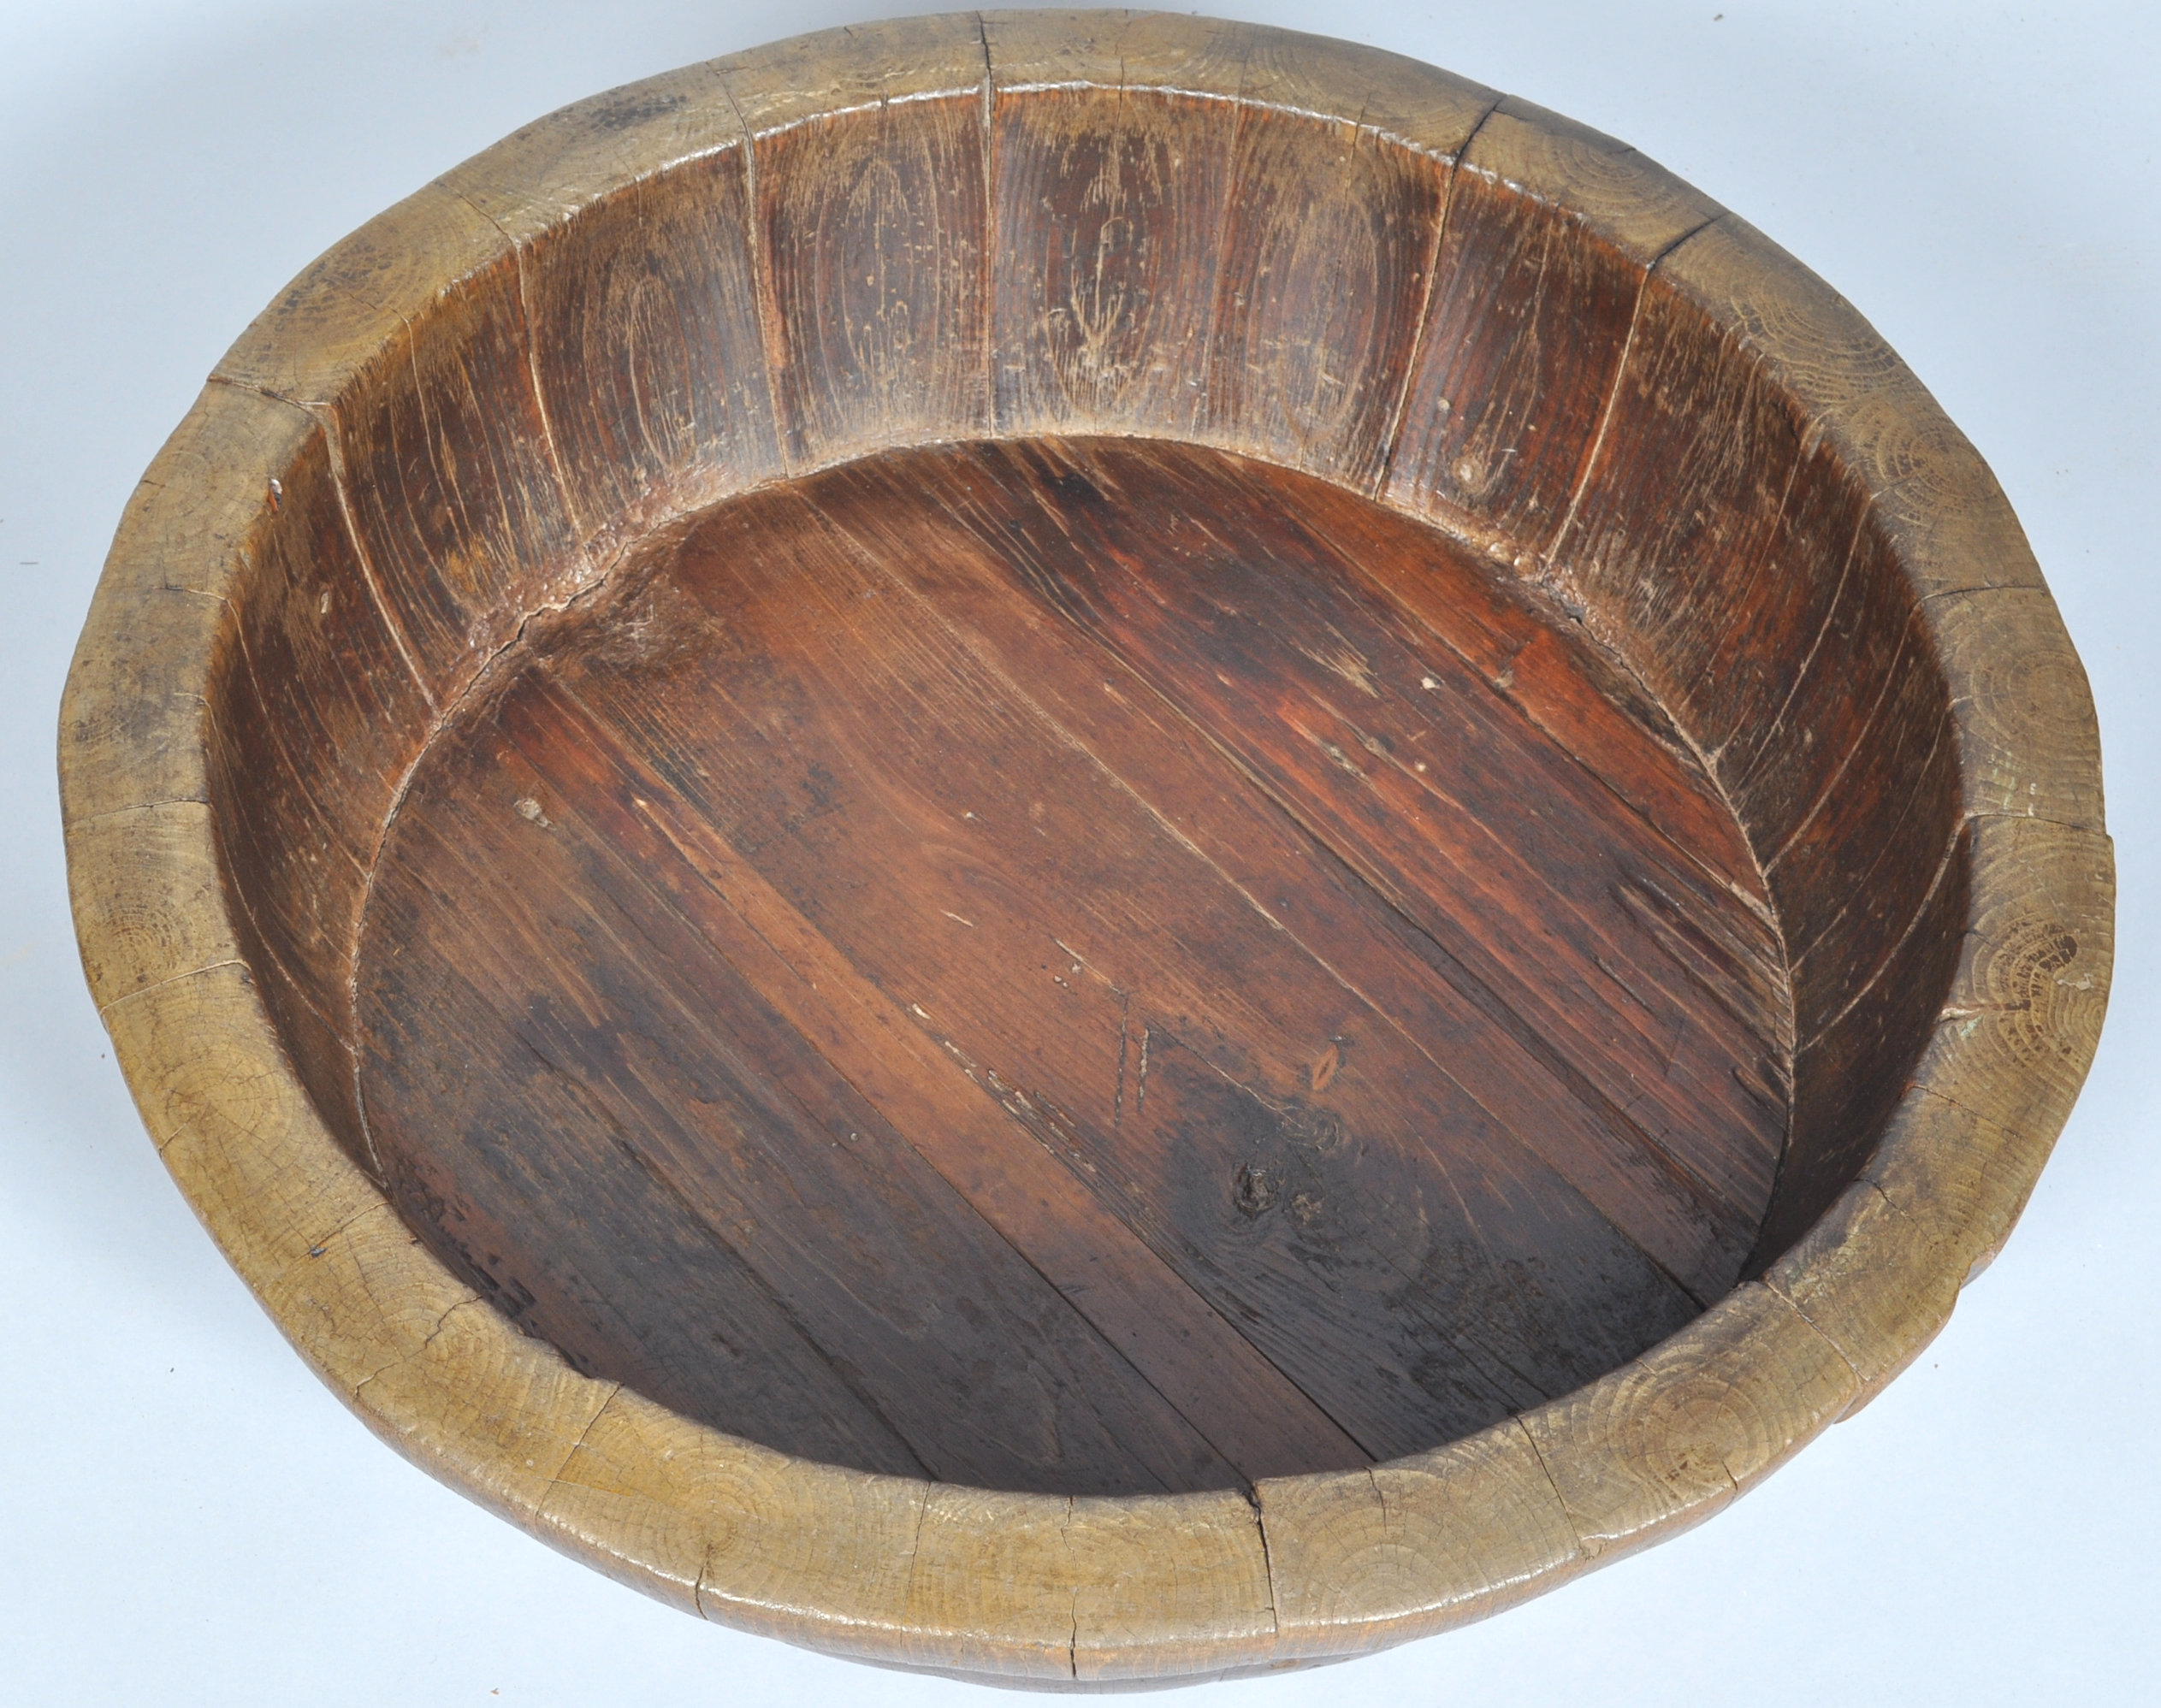 A large staved wooden mixing bowl with iron bindings, - Image 2 of 2